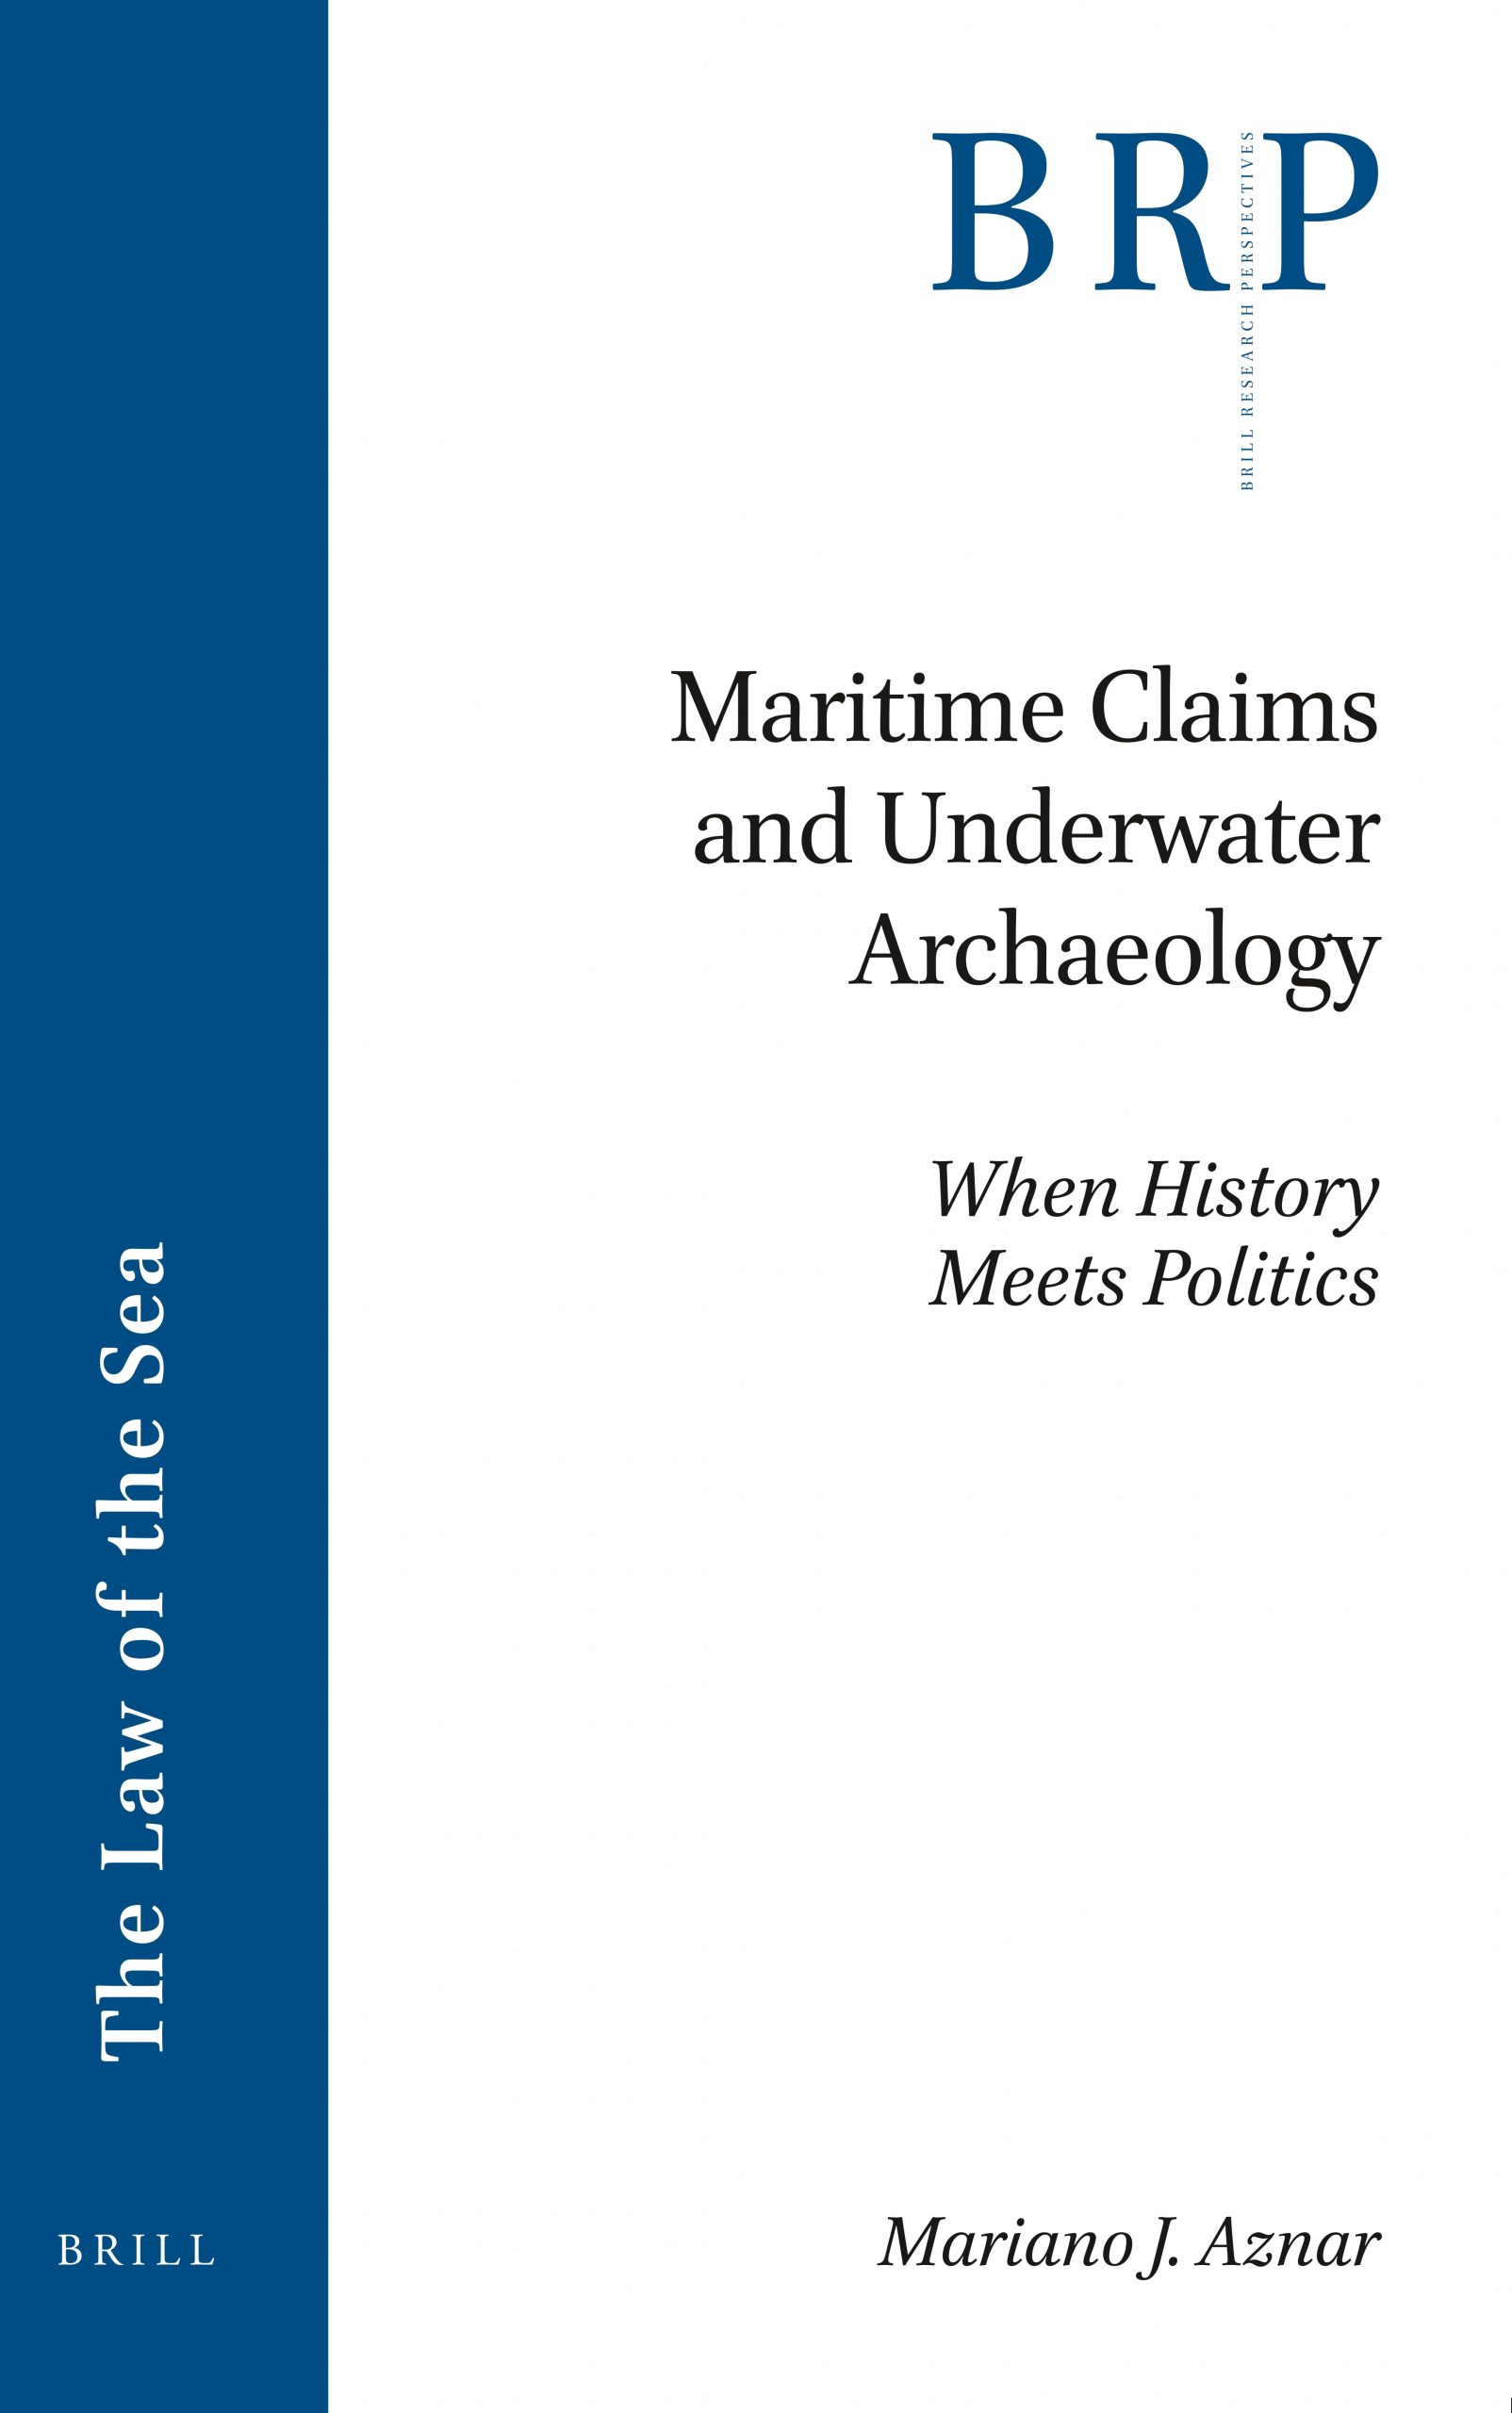 Personil Injury Lawyer In Aleutians East Ak Dans Maritime Claims and Underwater Archaeology: when History Meets ...